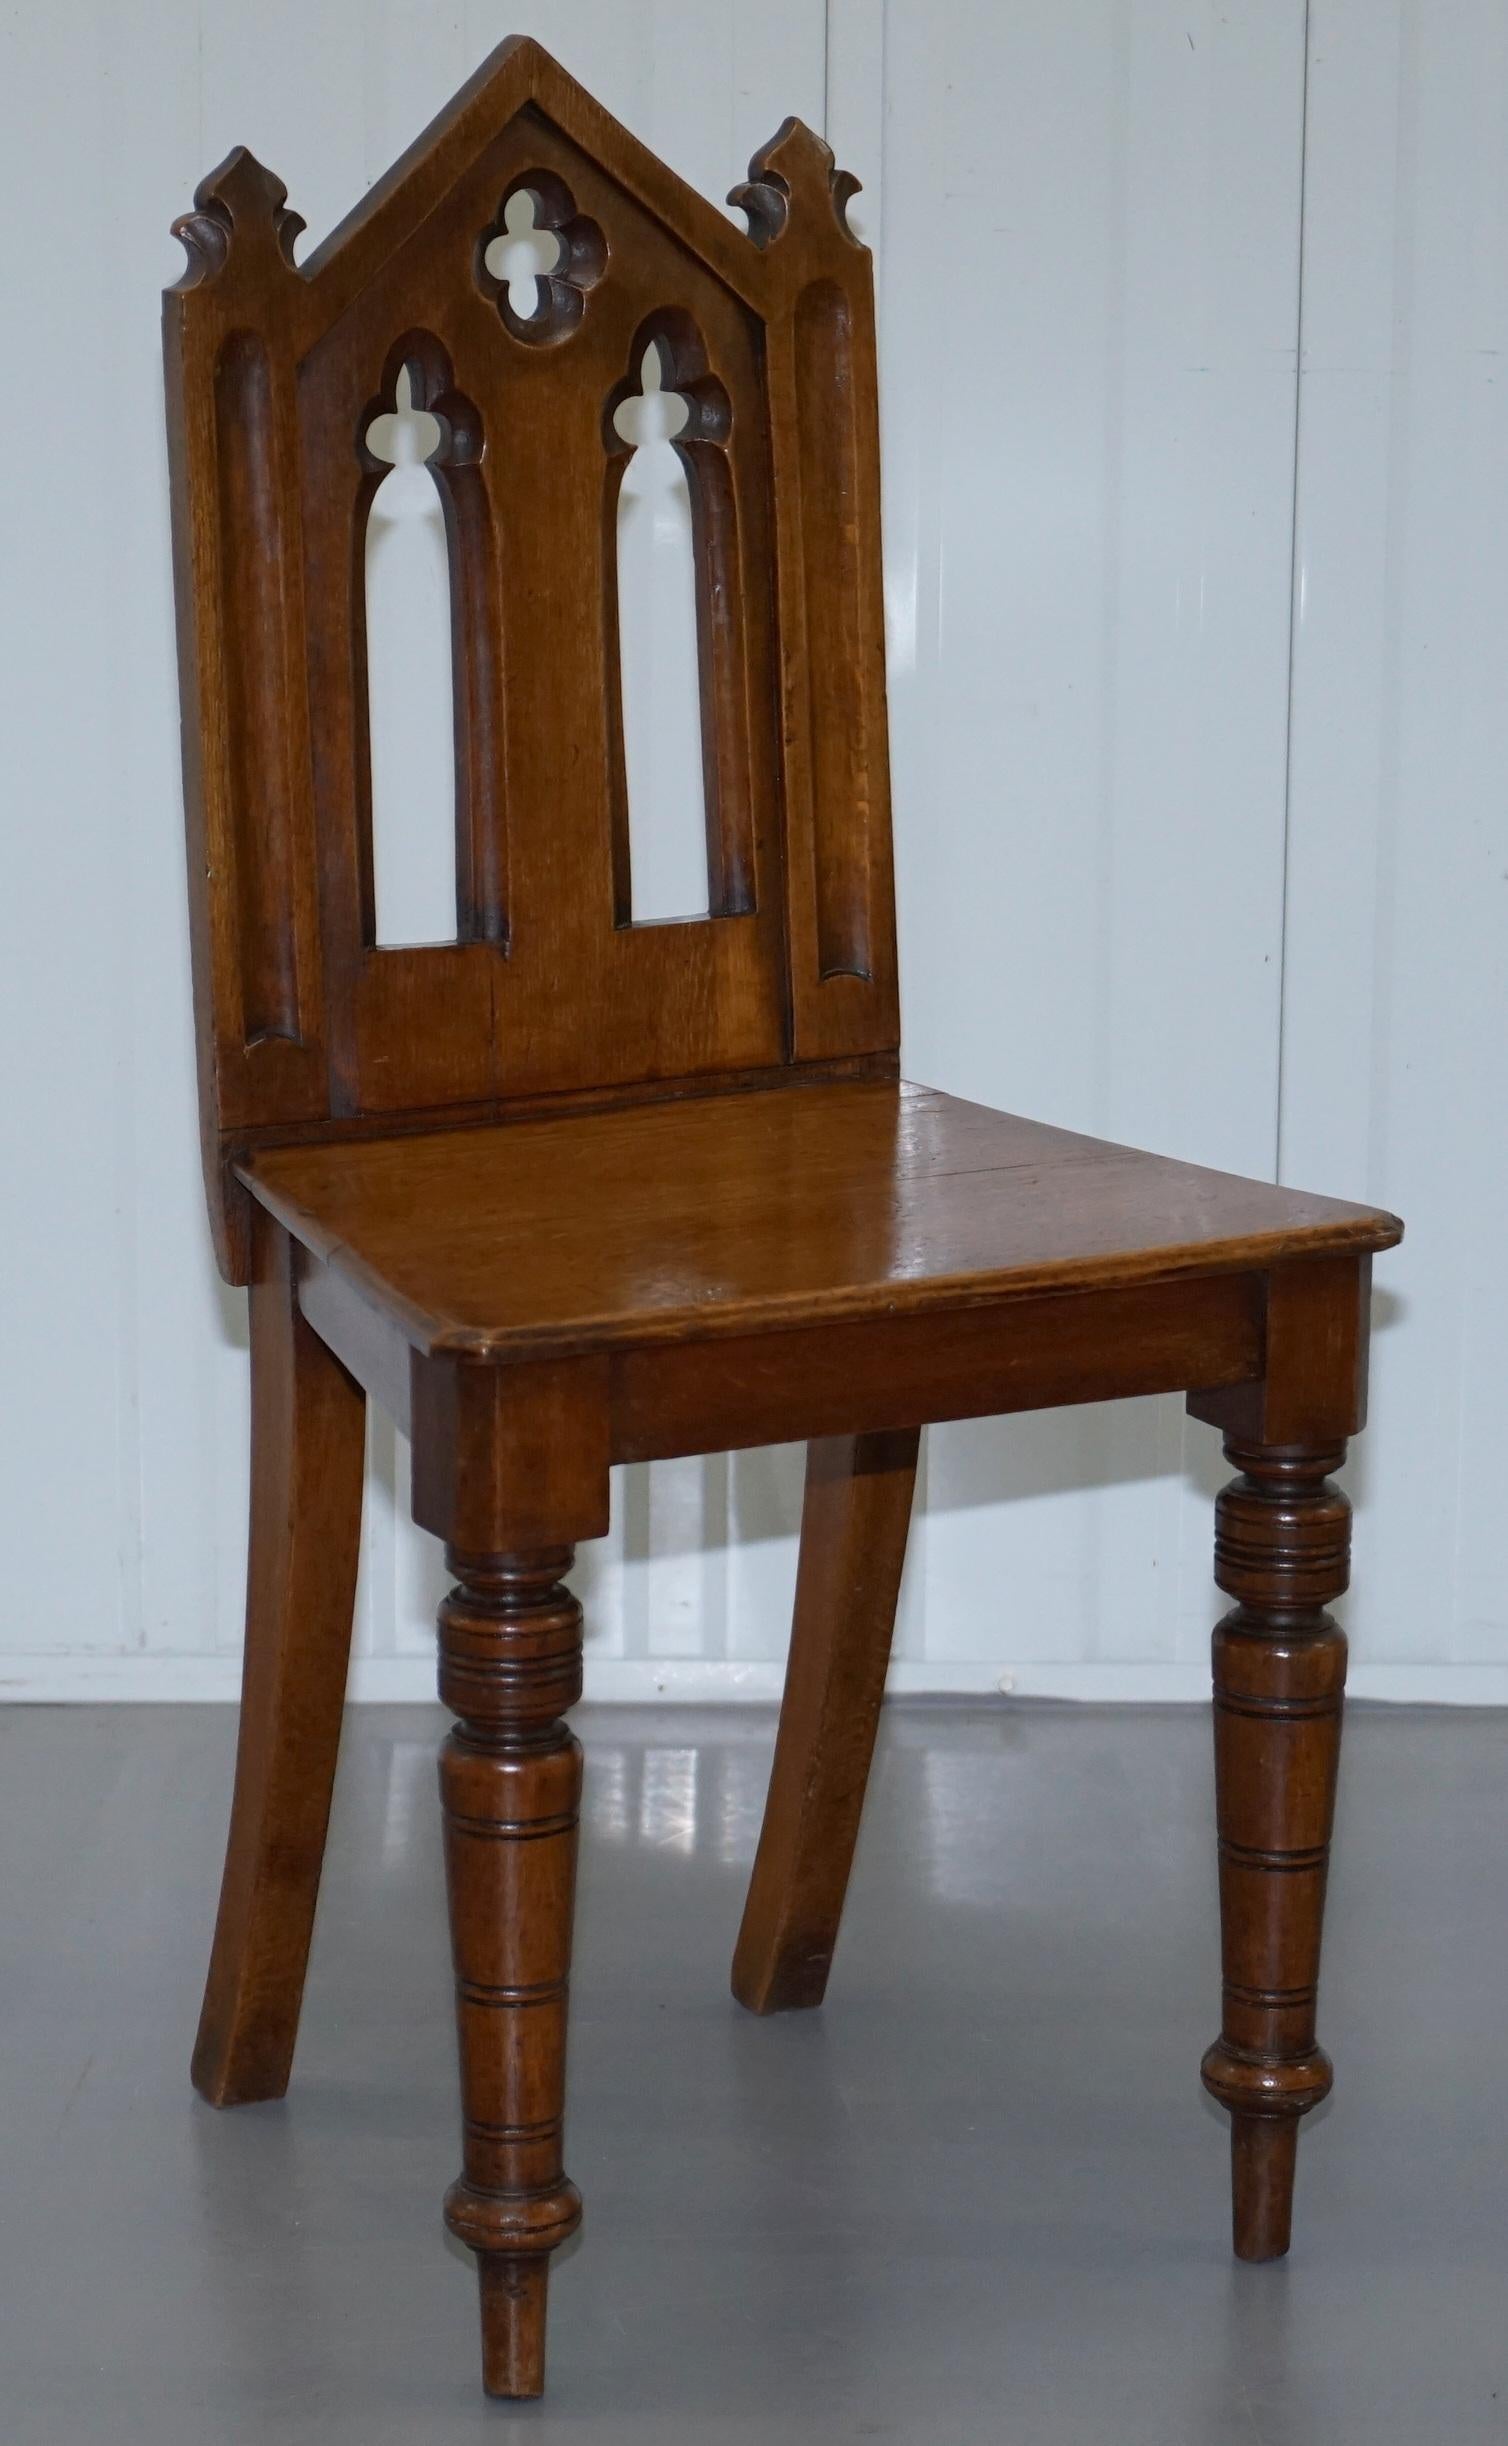 We are delighted to offer for sale this stunning pair of solid mahogany Gothic Revival hall chairs with steeple arched backs dating to circa 1880

A very good looking and decorative pair of chairs, the design is quite rare for the type, I’ve only